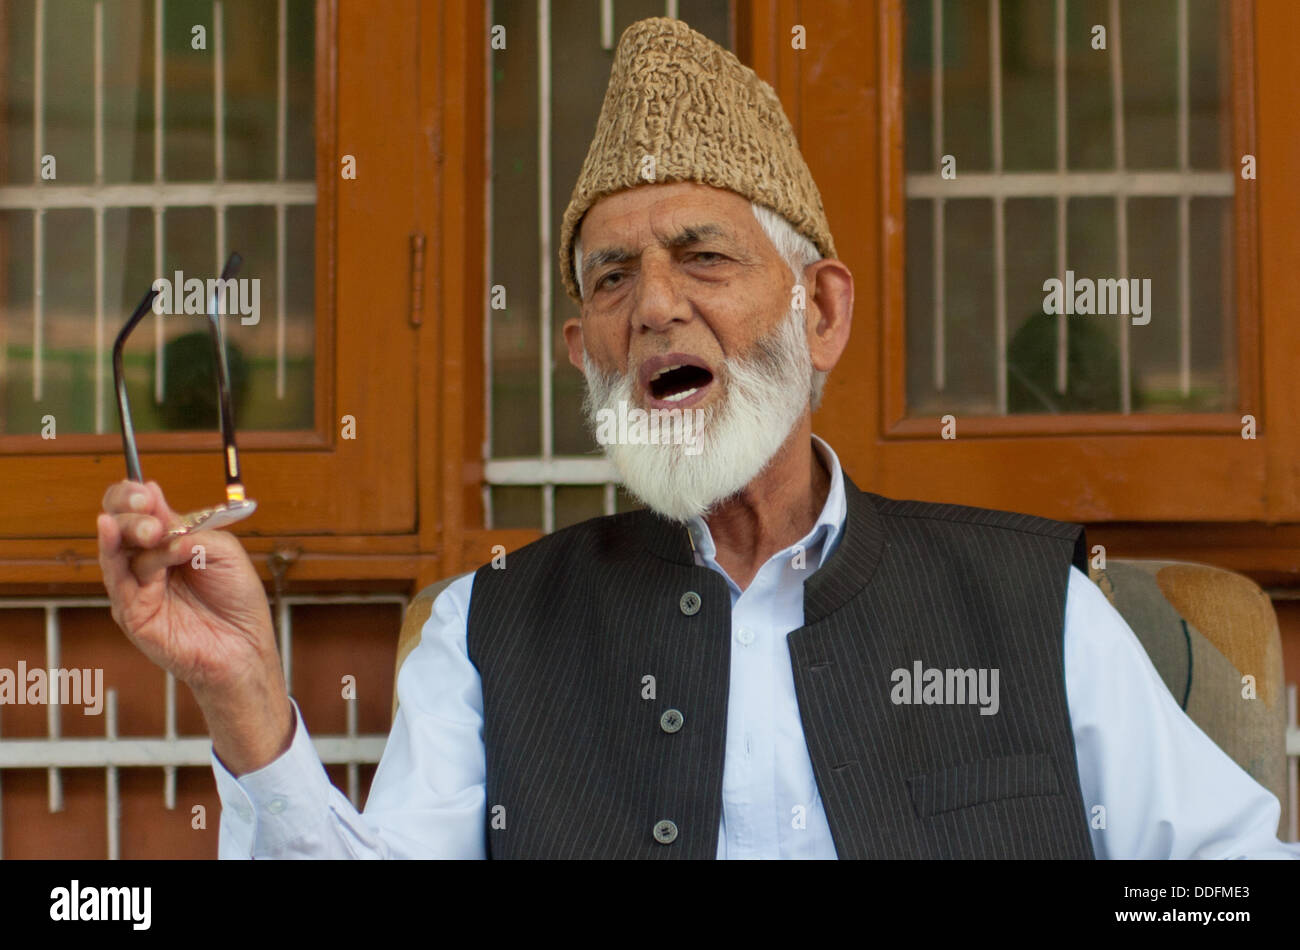 Srinagar, India. 2 September 2013.  Kashmiri separatist leader Syed Ali Geelani addresses a press conference in Srinagar, the summer capital city of Indian-administered Kashmir.  Mr Geelan called for a shutdown on September 7 and peaceful protests on September 6 against  world-renowned orchestra-conductor Zubin Mehta's concert in Srinagar , saying the  event  was meant to divert attention of the international community from 'gross human rights violations being committed by Indian forces against Kashmiris.'  Sofi Suhail/ Alamy Live News) Stock Photo